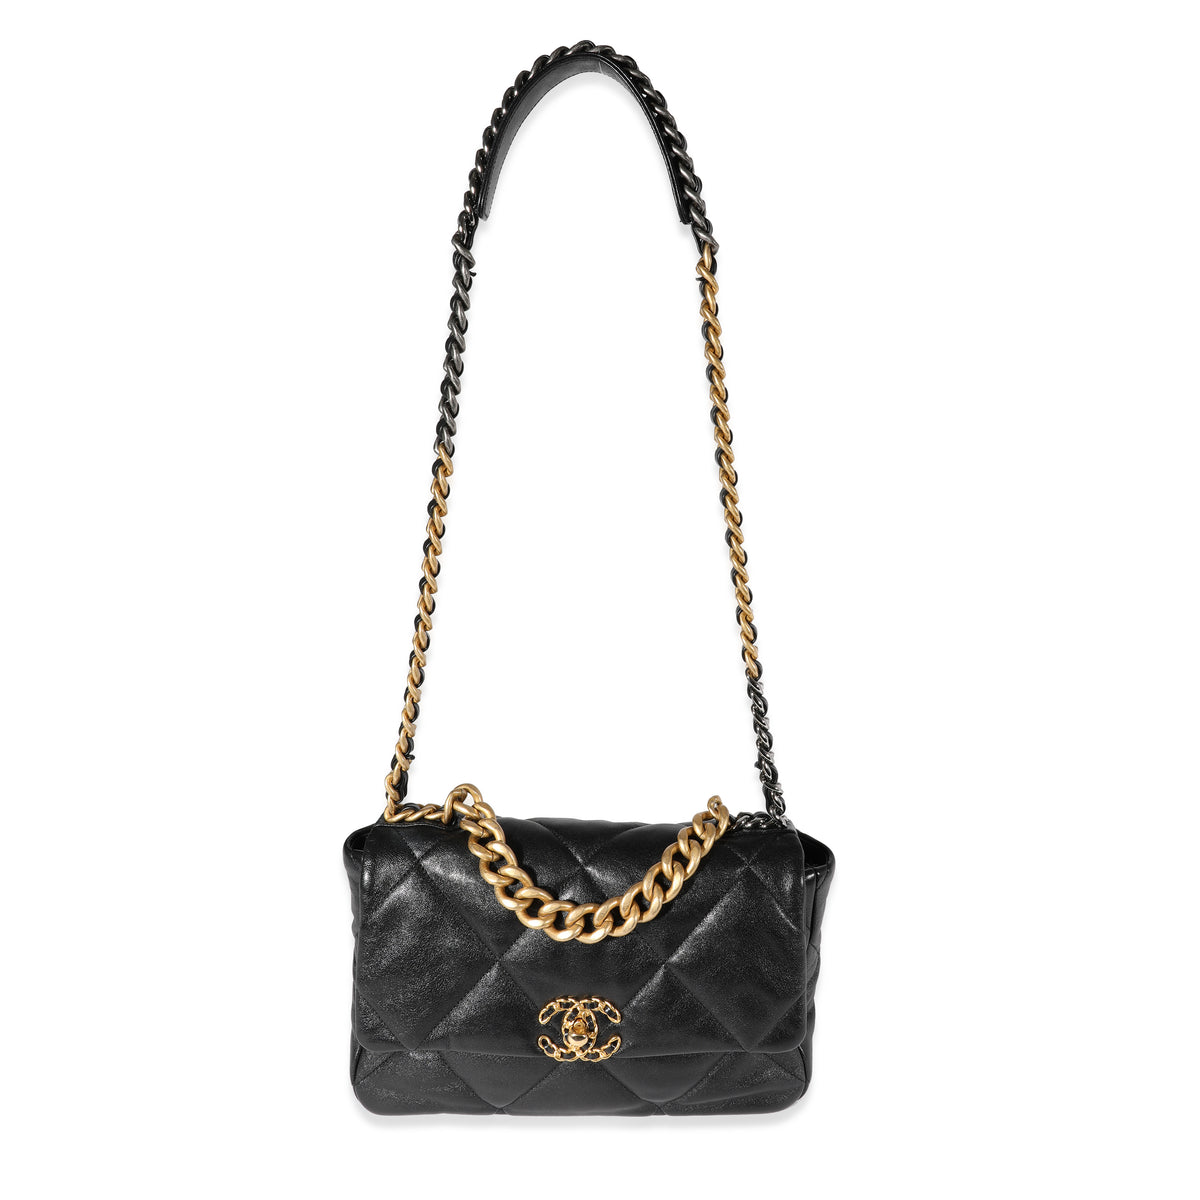 Chanel Black Lambskin Quilted Chanel 19 Shopping Bag, myGemma